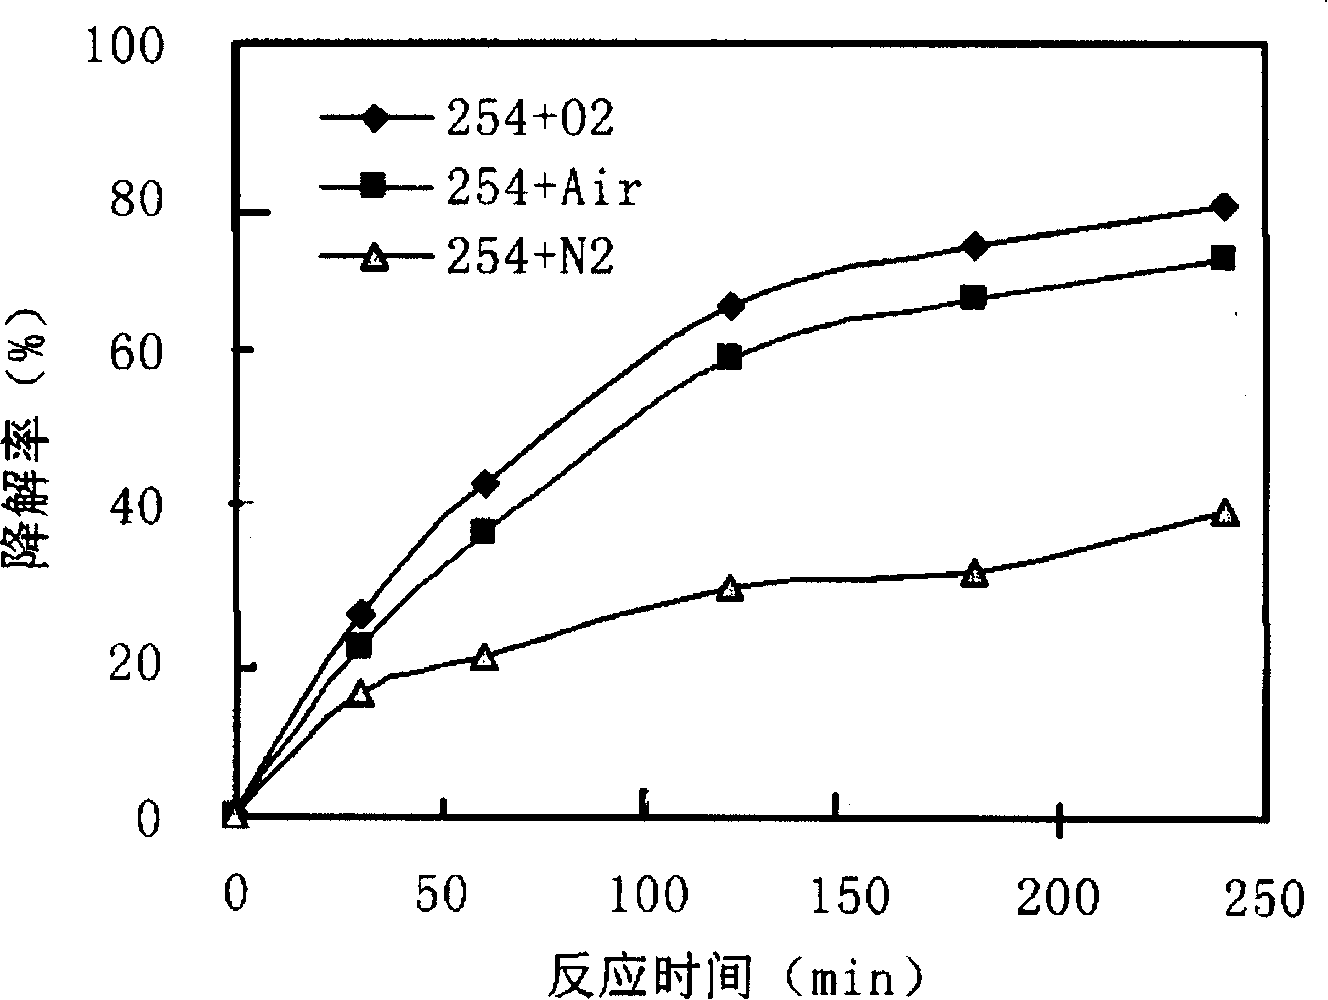 Method of dissolubility iron salt induction photochemical degradation total fluorination substituted compound